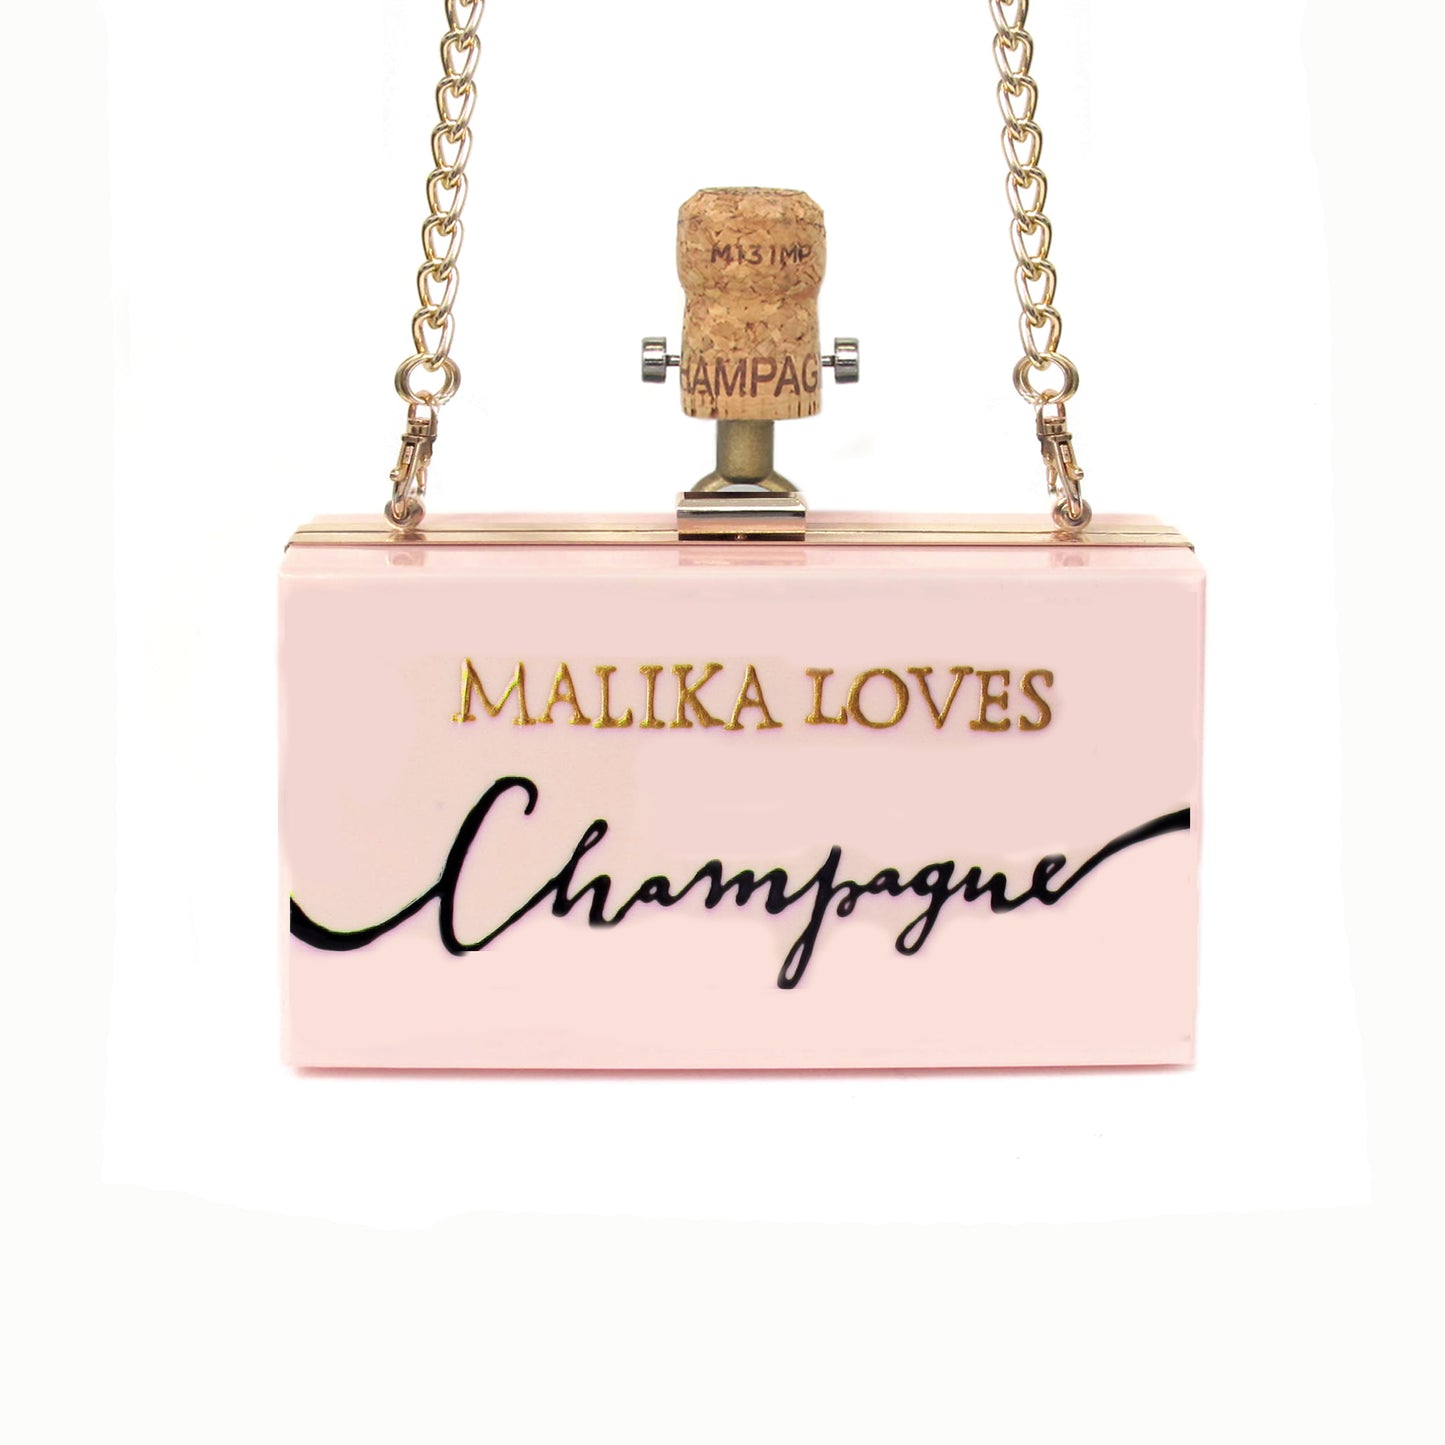 Made to order Champagne Clutch